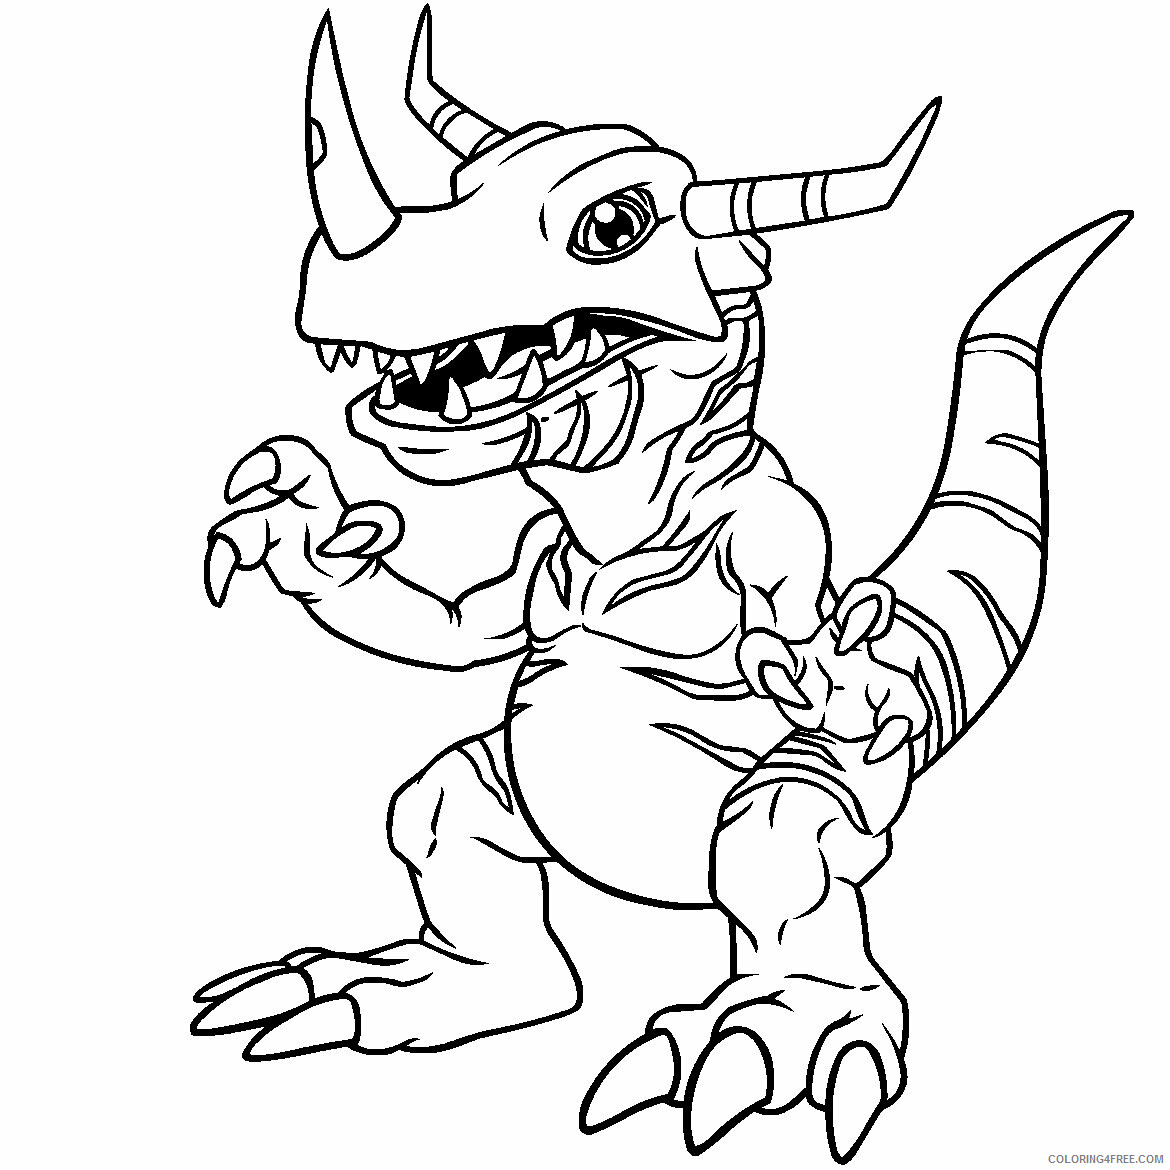 Digimon Printable Coloring Pages Anime digimon 41 2021 0355 Coloring4free